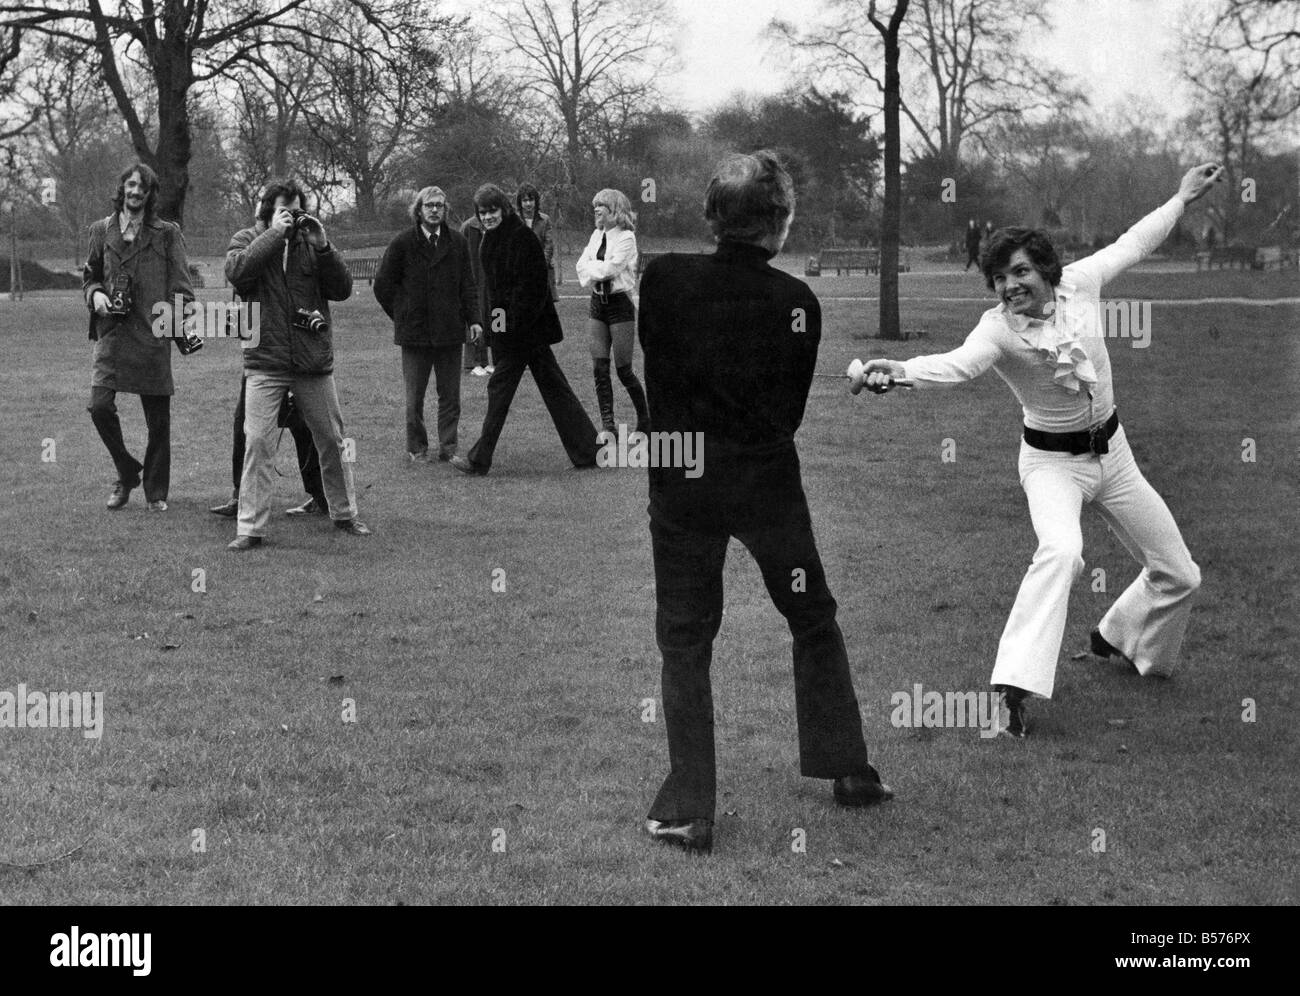 Actor-singer Jess Conrad challenged Actor Larry Taylor to a duel in Regents Park because of a dispute concerning ownership of car number Plate JC 21. Jess Conrad's face was insured for £20,000 by Lloyds. After the duel had been 'fought' for a few minutes near the open air theatre in Regents Park a Parks Police Cyclist arrived on the scene and told them that dueling was not aloud and they would have to stop. Jess Conrad's second was Andrew Ray. Larry Taylor's second was Rocky Taylor. The Judge was model Susan Louise 19 Stock Photo